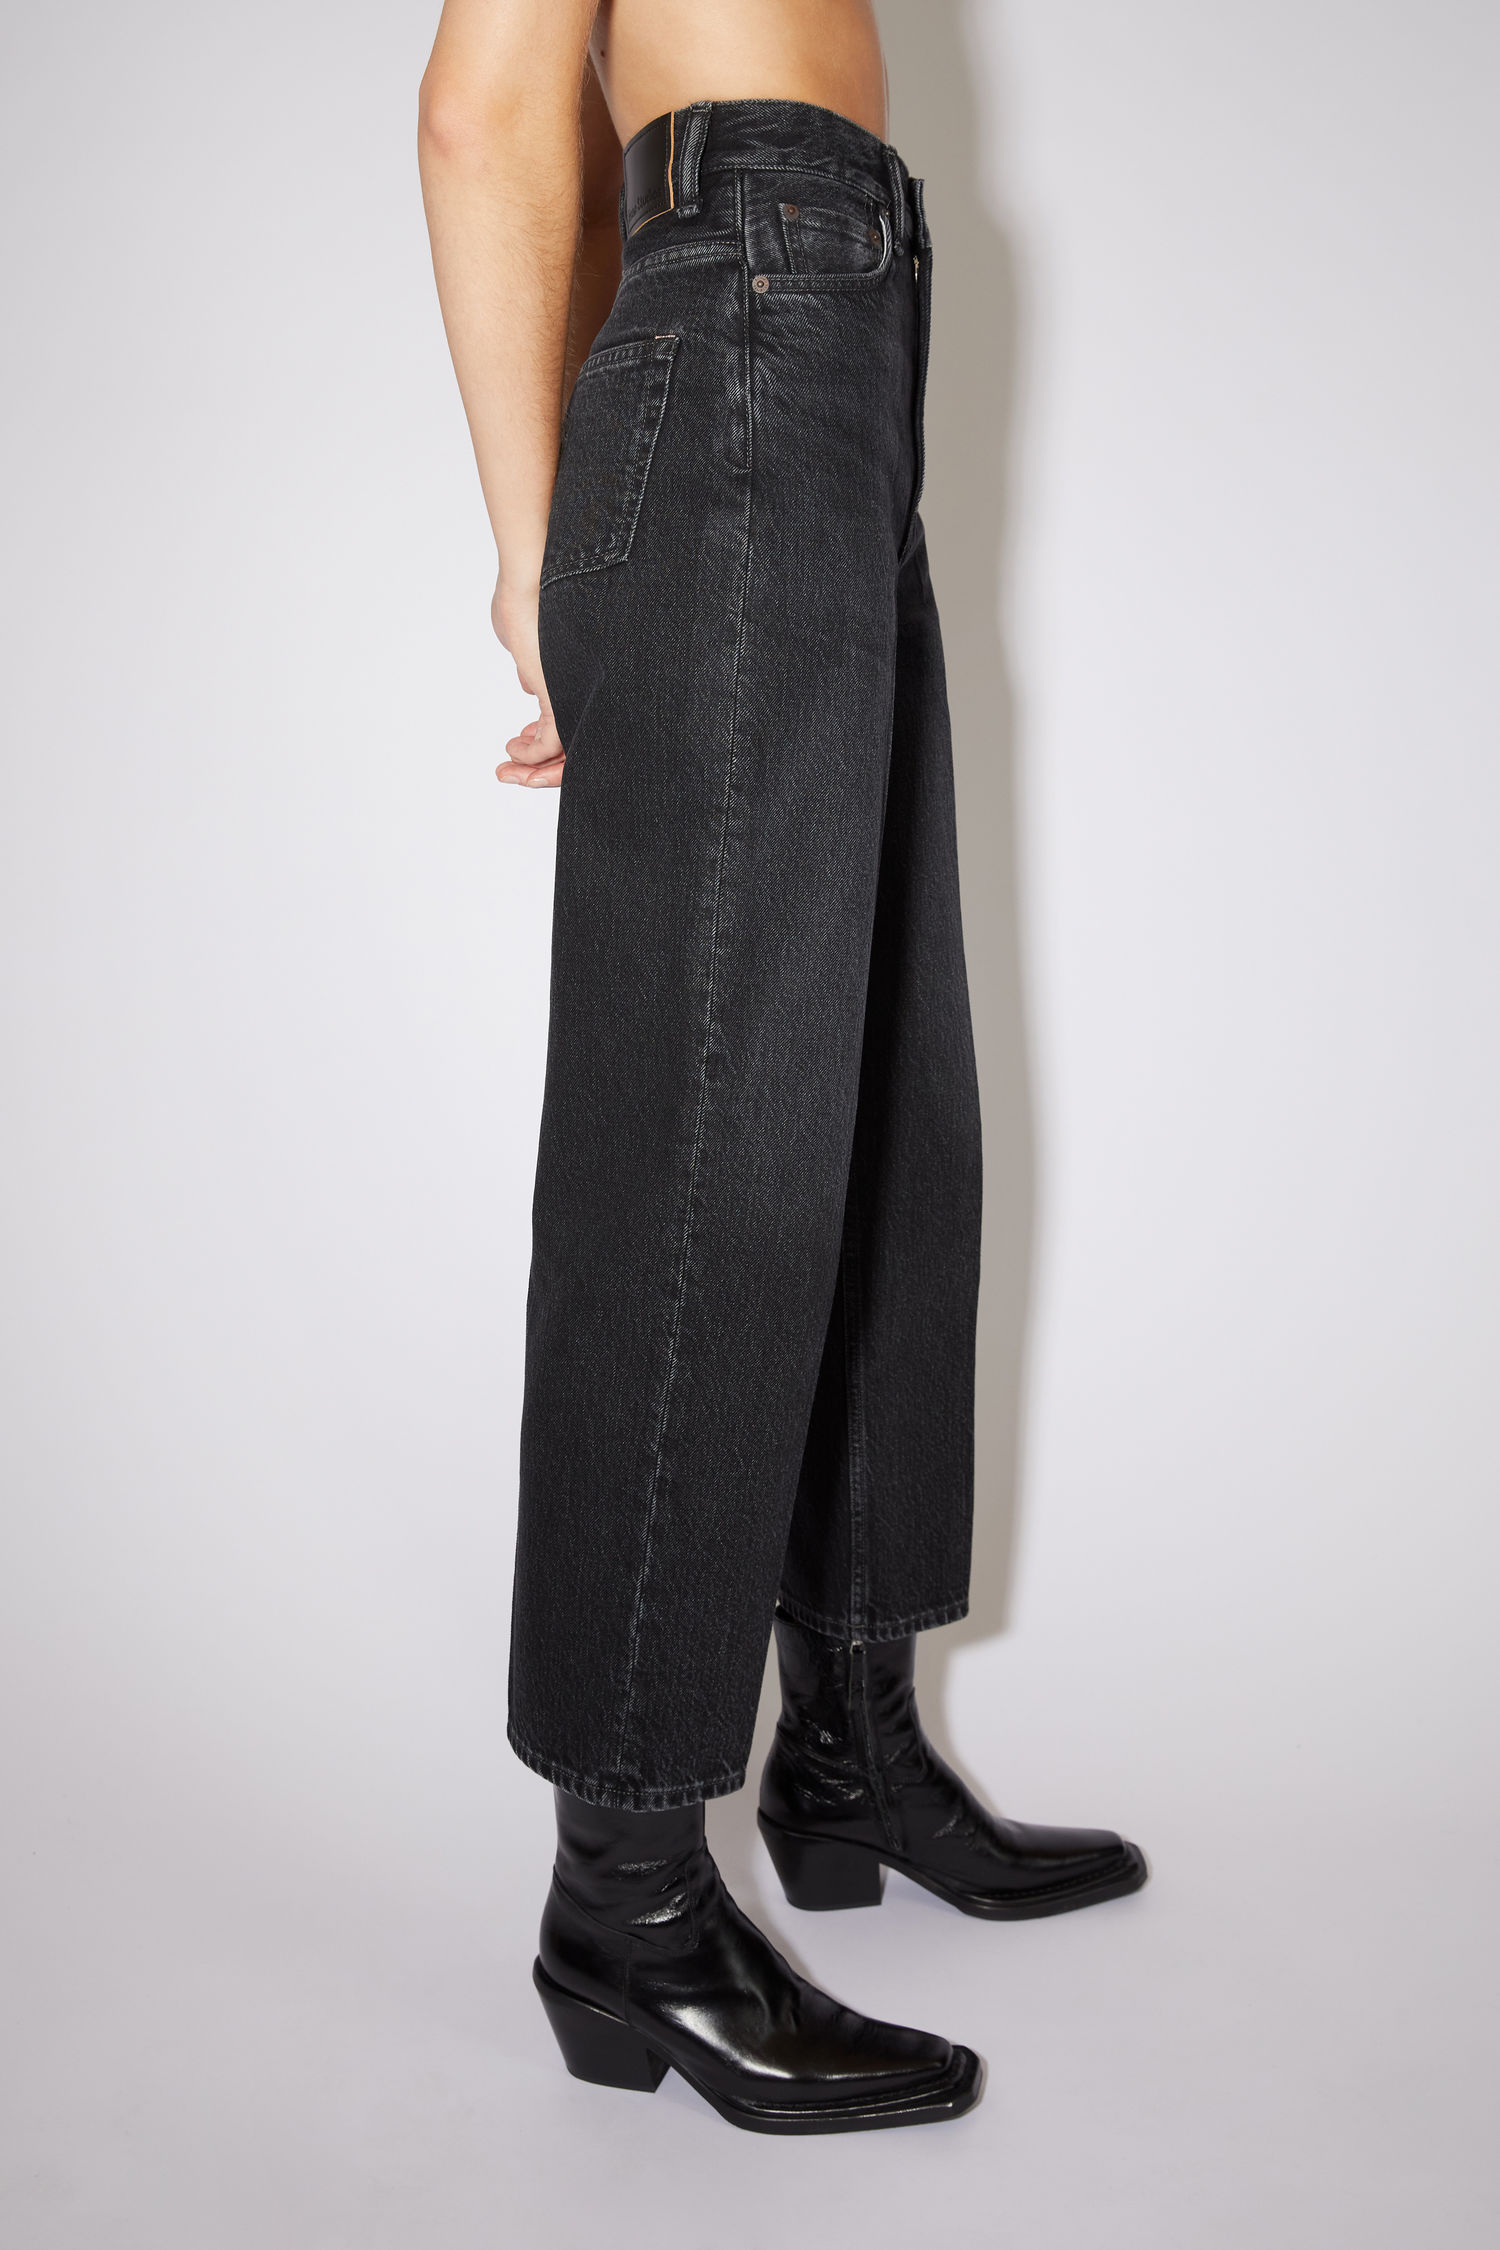 Acne Studios - Relaxed fit jeans - Black